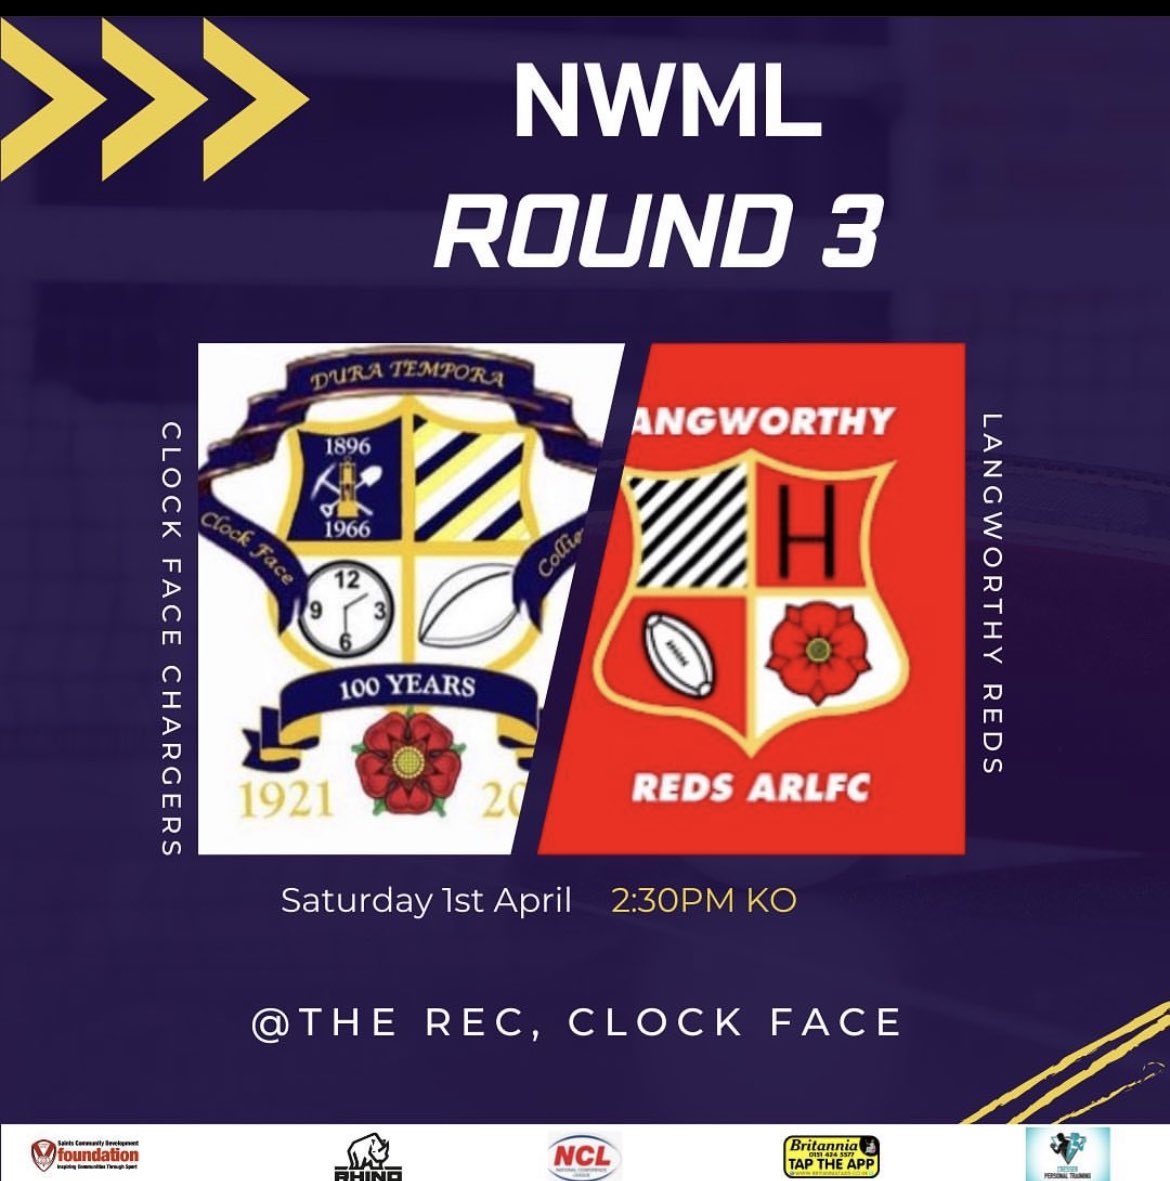 Get down to the Rec this Saturday to support our NWML Clock Face Chargers against @LangworthyReds #CFM #COYC